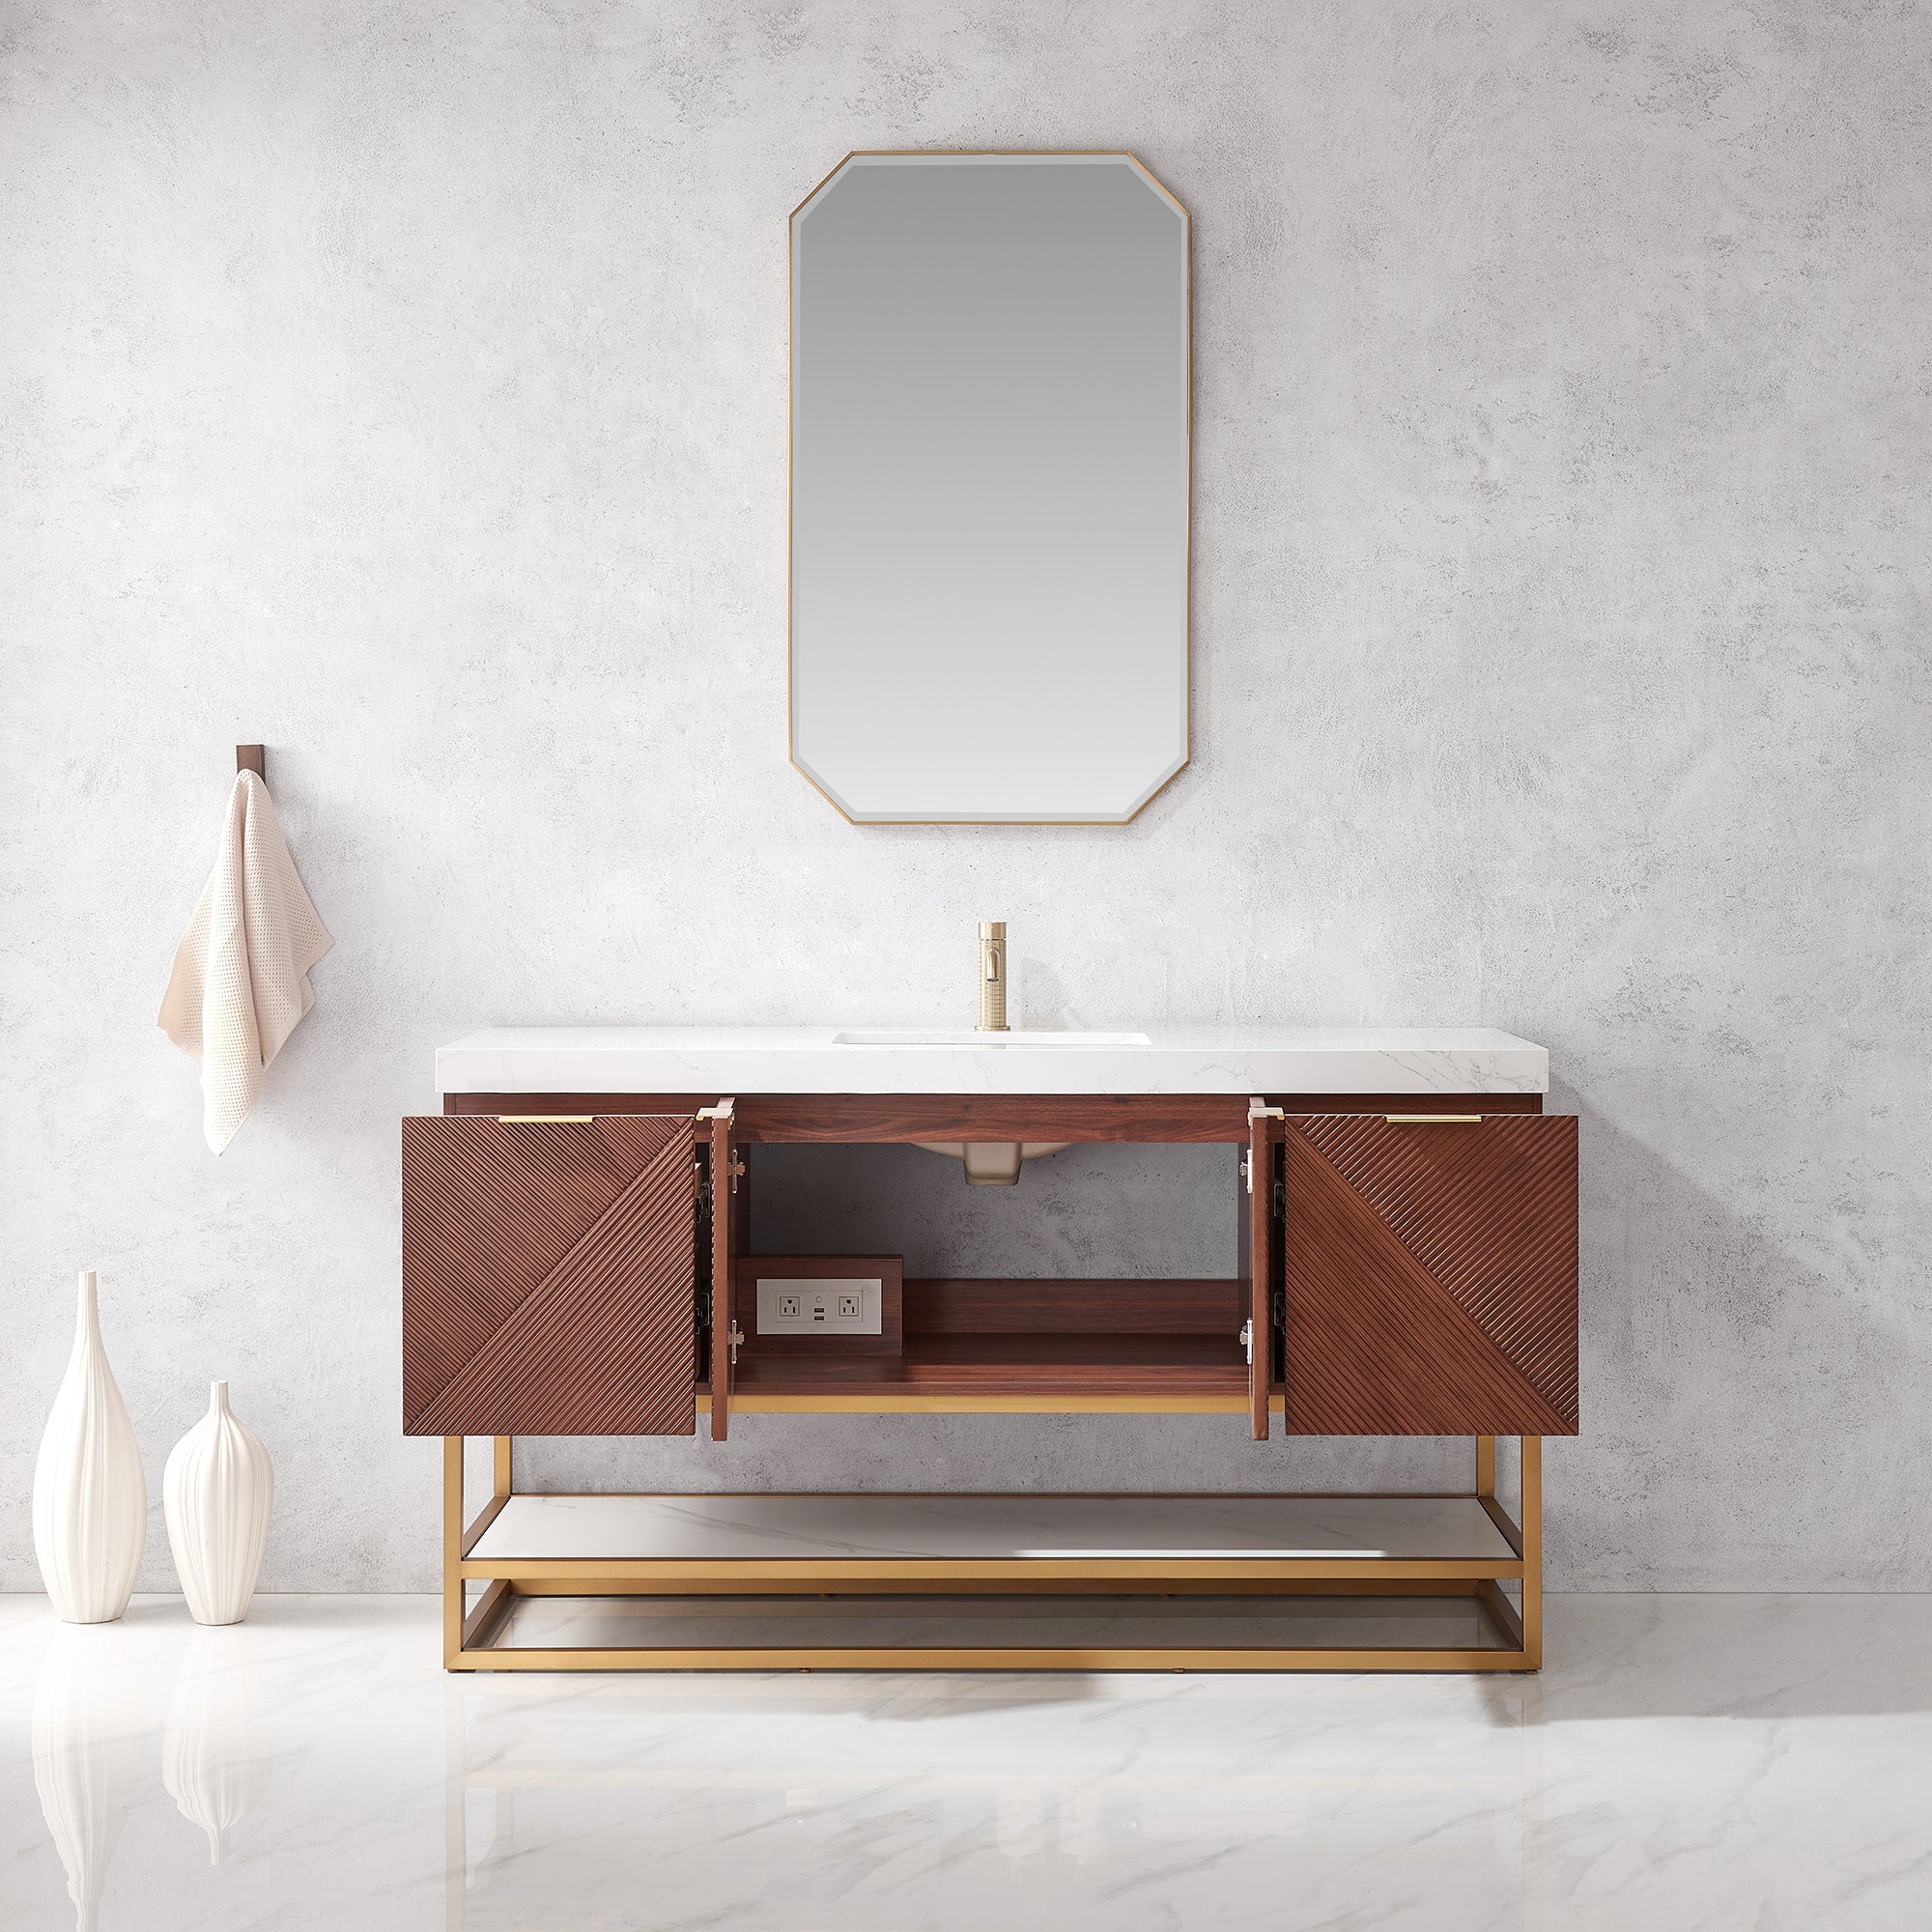 Mahon 60G" Free-standing Single Bath Vanity in North American Deep Walnut with White Grain Composite Stone Top